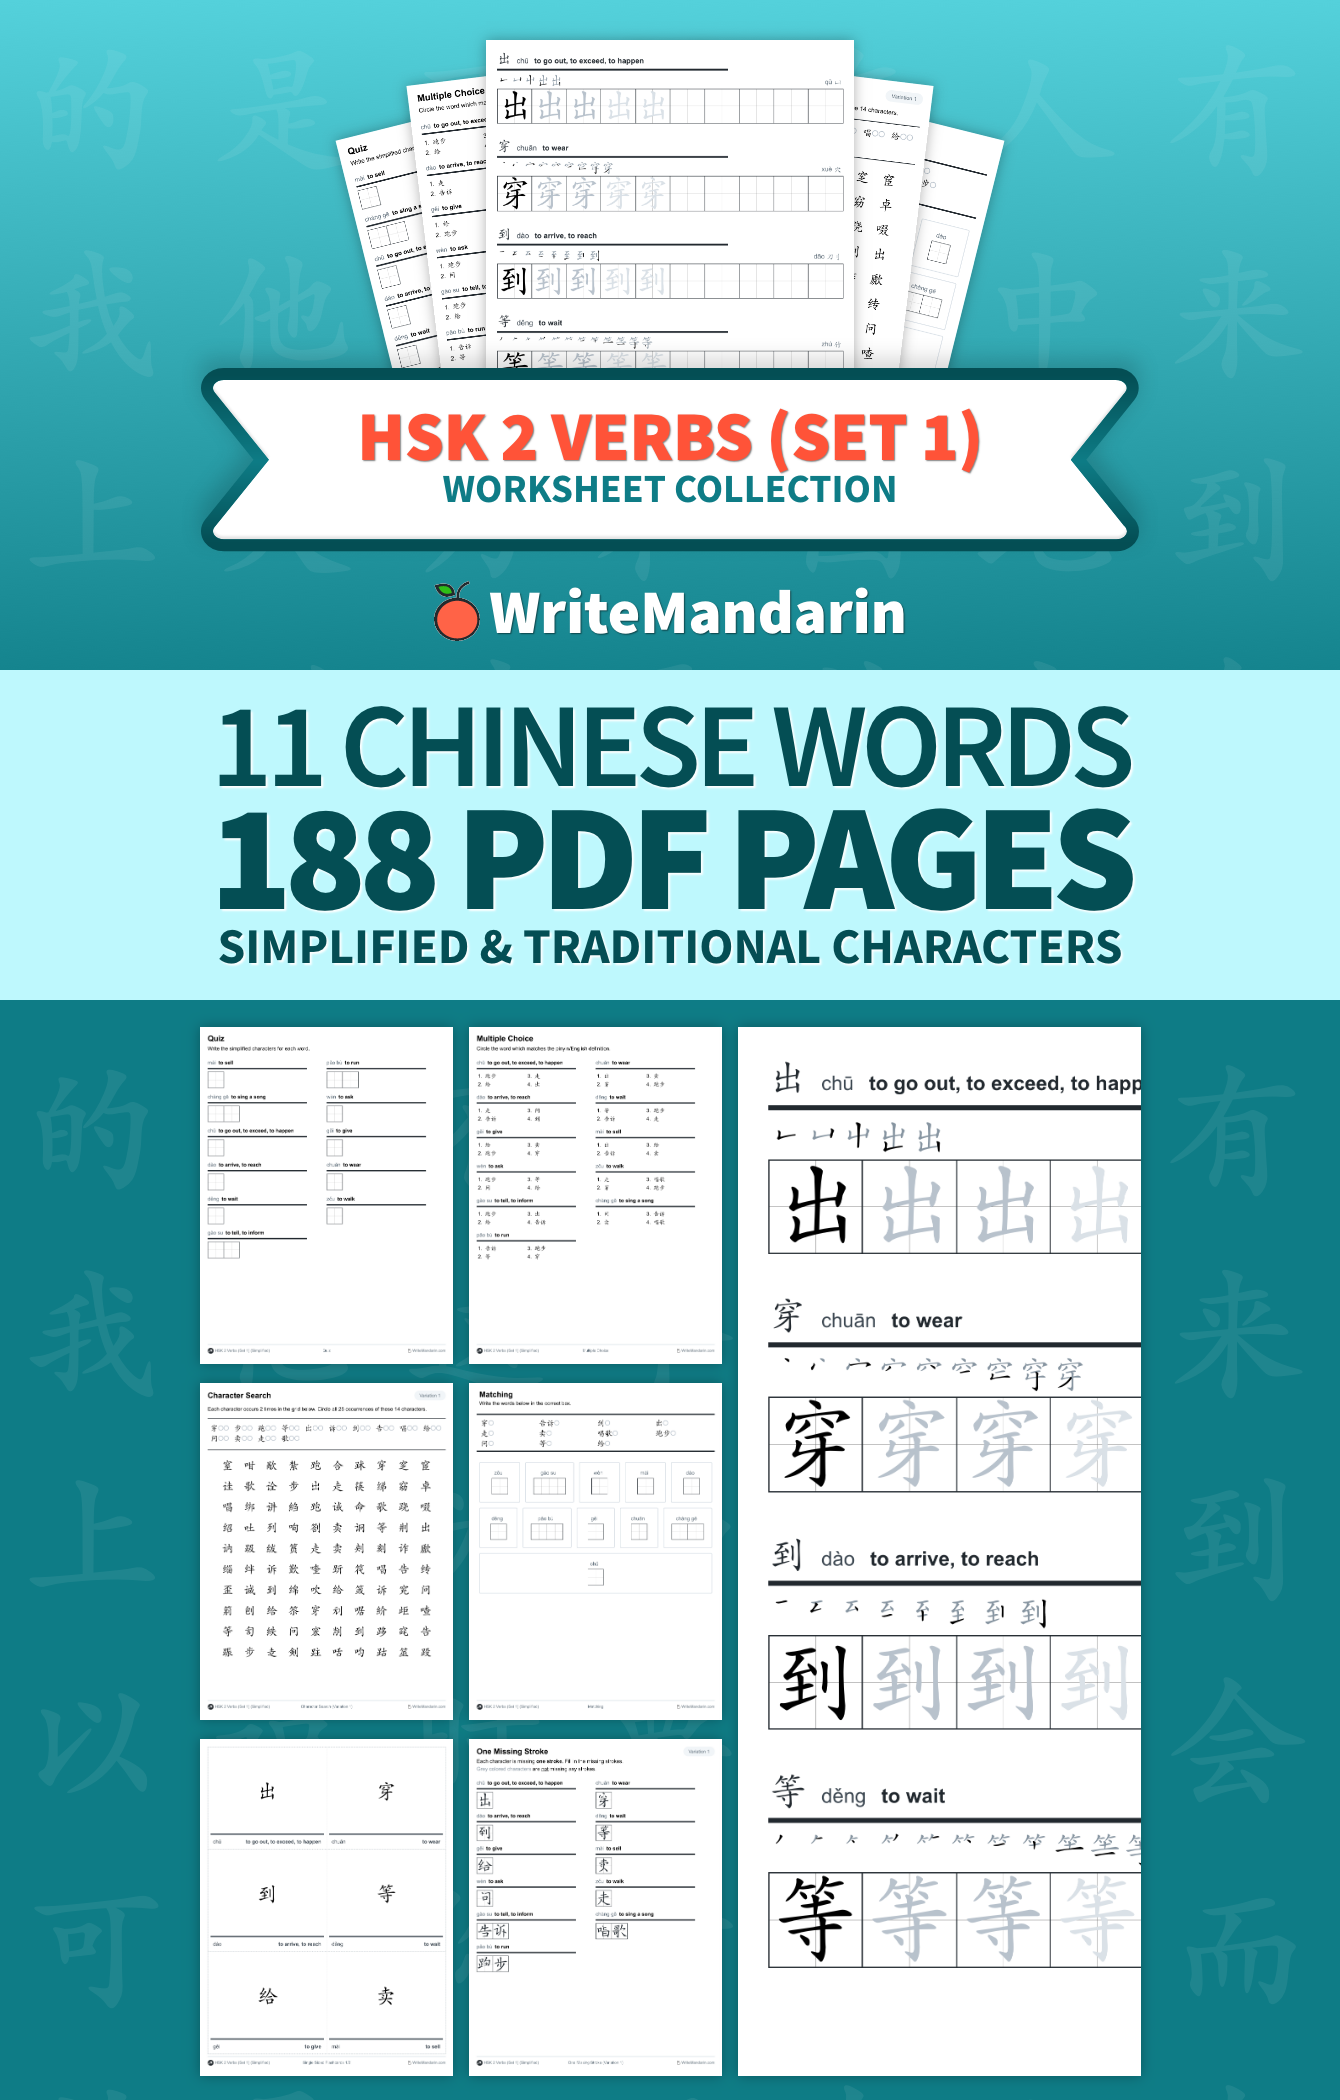 Preview image of HSK 2 Verbs (Set 1) worksheet collection